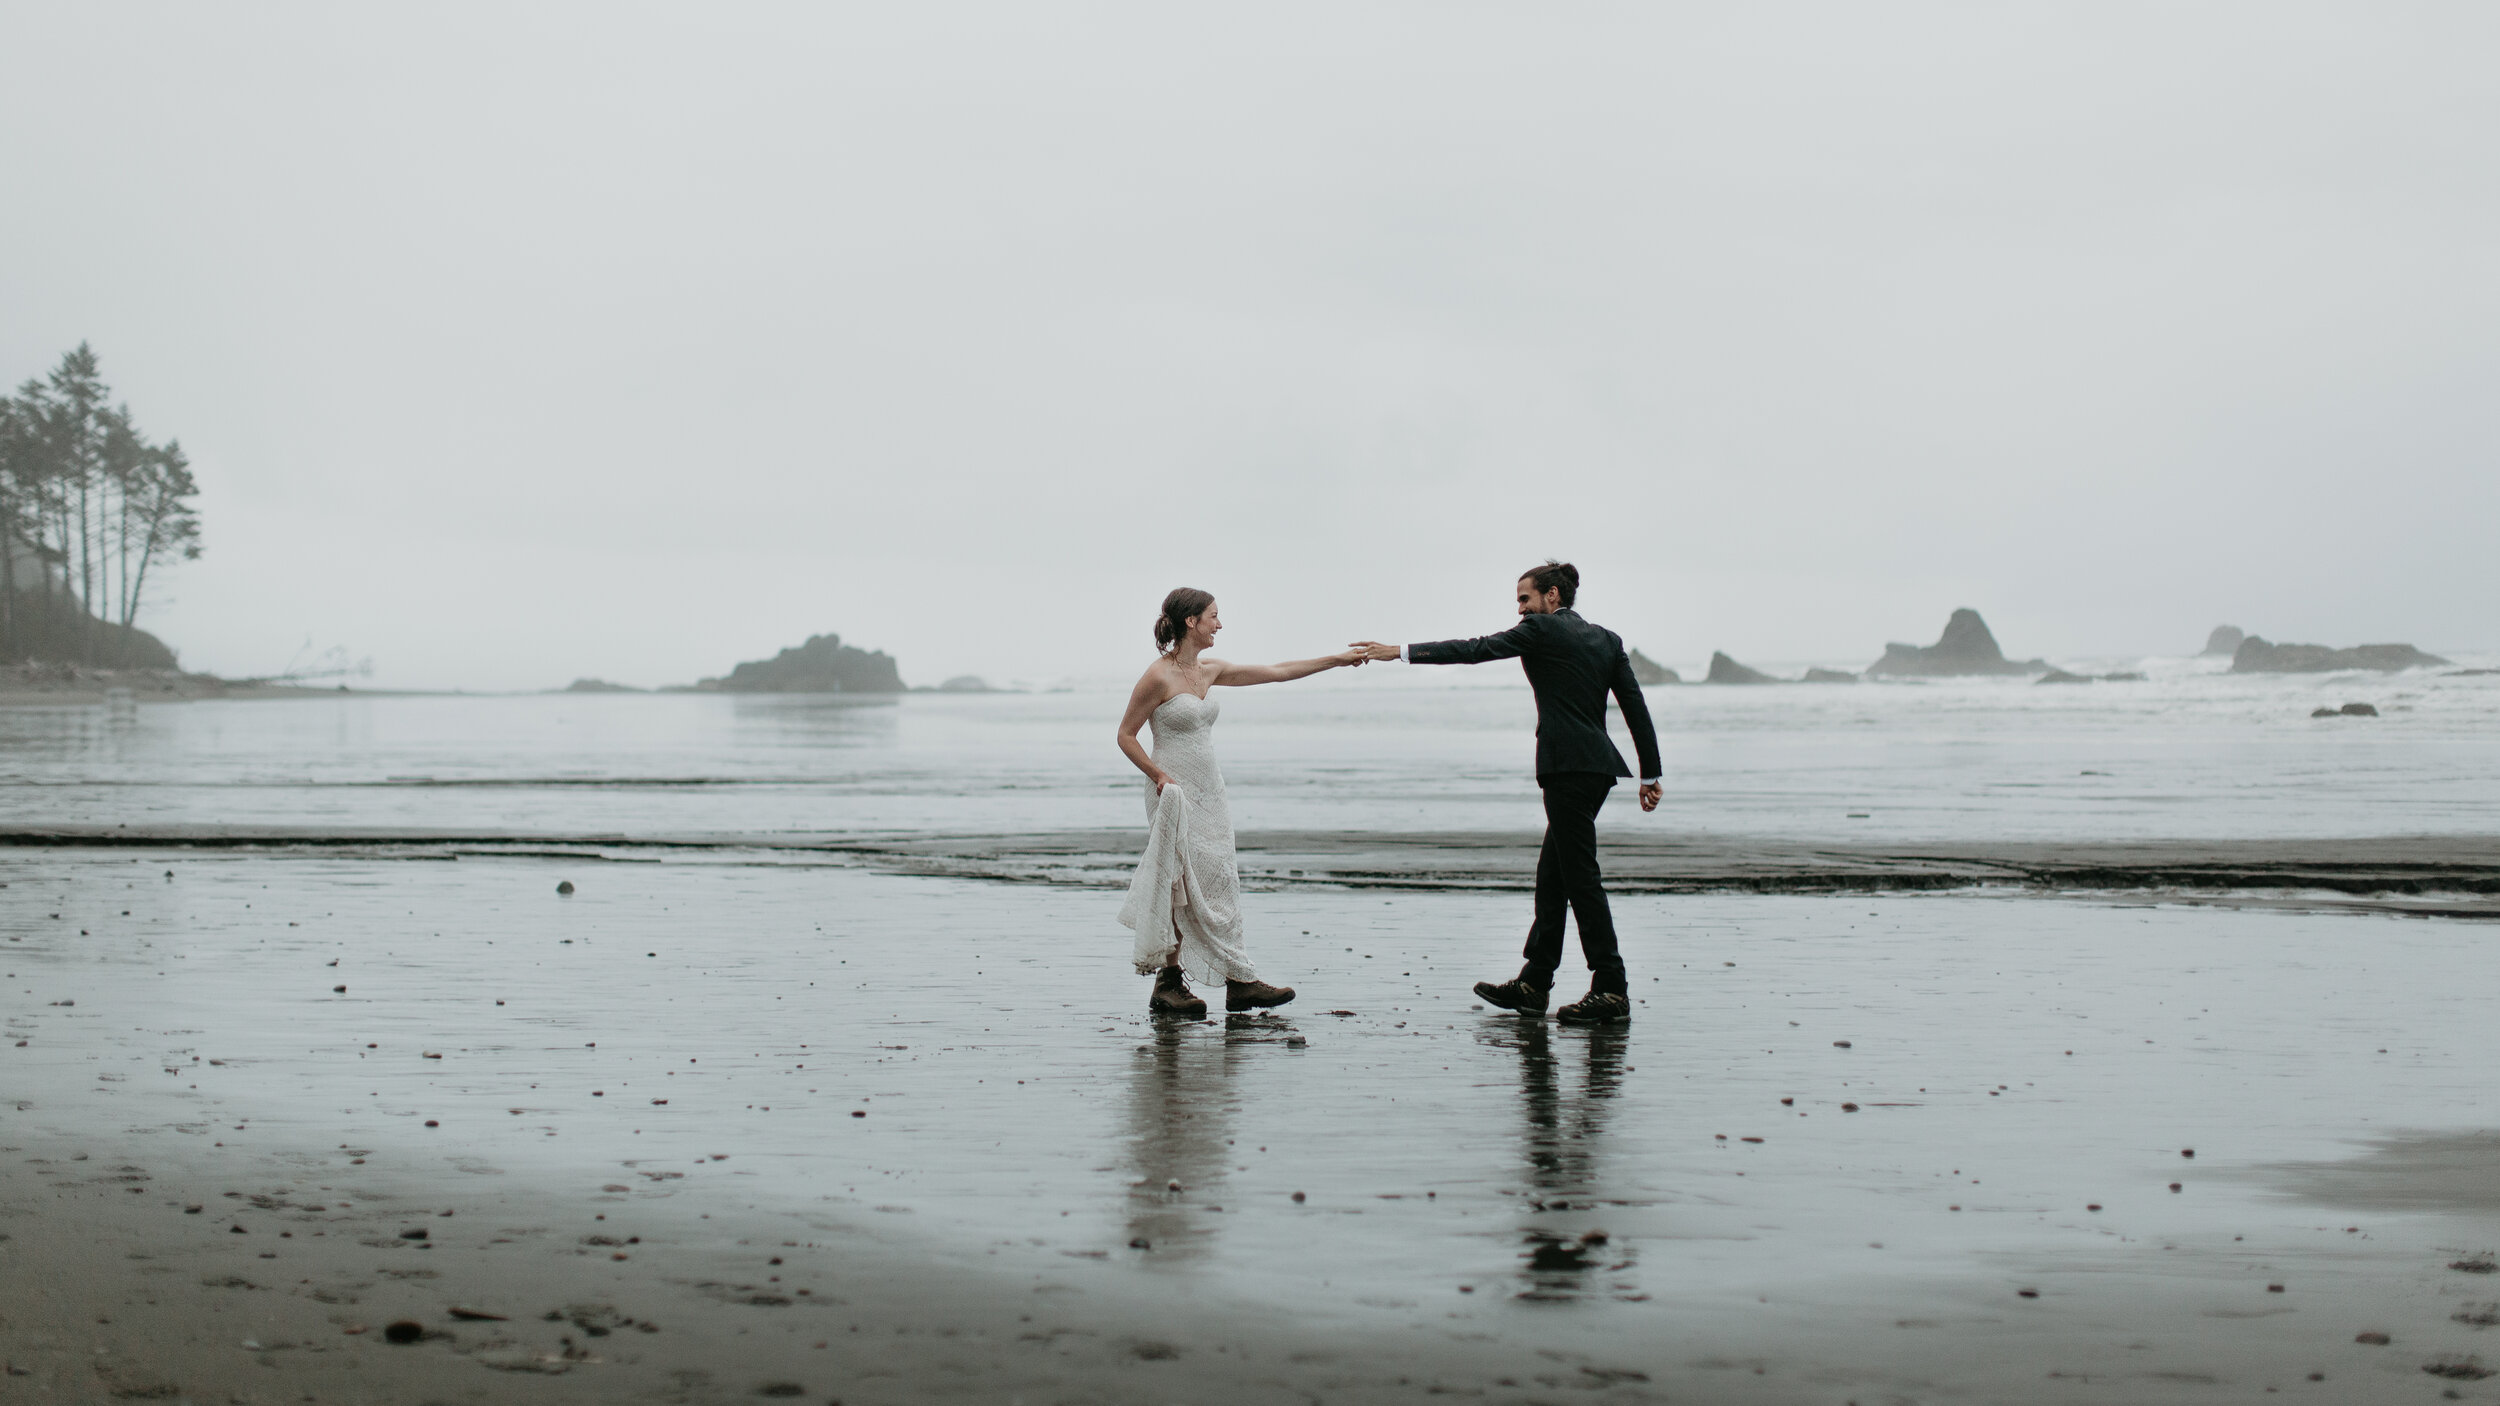 Nicole-Daacke-Photography-Olympic-national-park-elopement-photography-intimiate-elopement-in-olympic-peninsula-washington-state-rainy-day-ruby-beach-hoh-rainforest-elopement-inspiration-rainforest-pnw-elopement-photography-173.jpg